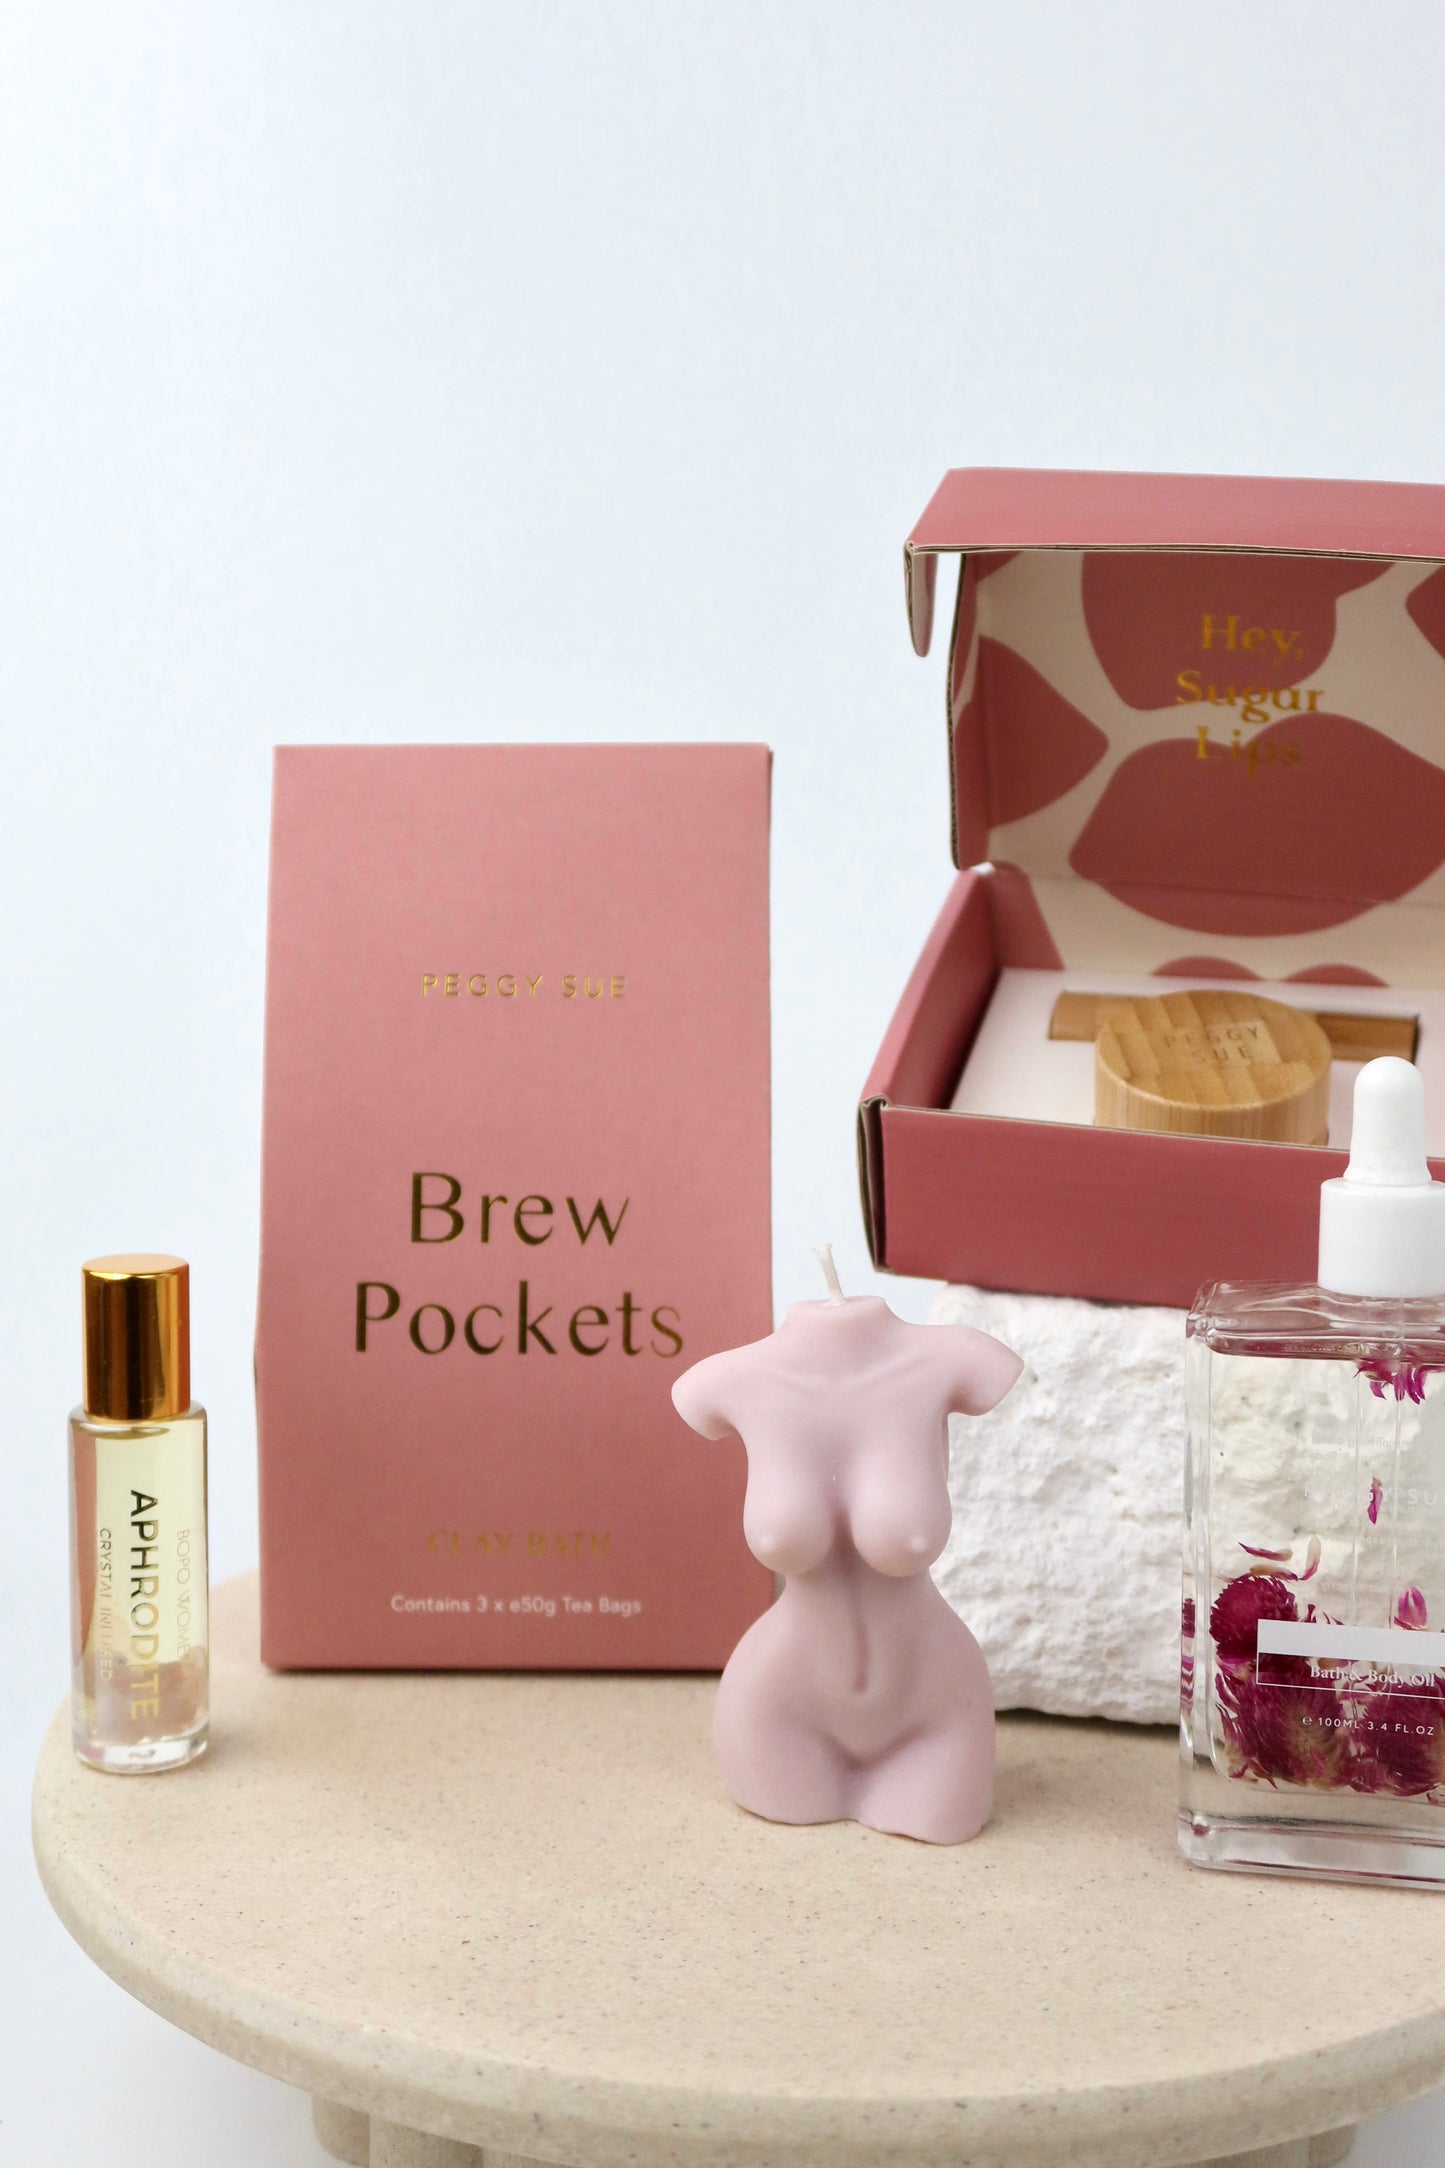 The 'Glow' Gift box. This bath and body hamper includes Bath brew pockets and a silk ip care kit by Peggy Sue. A crystal perfume roller and Spring of seed body oil by Bopo Women and a handmade soy wax lady figure candle. 